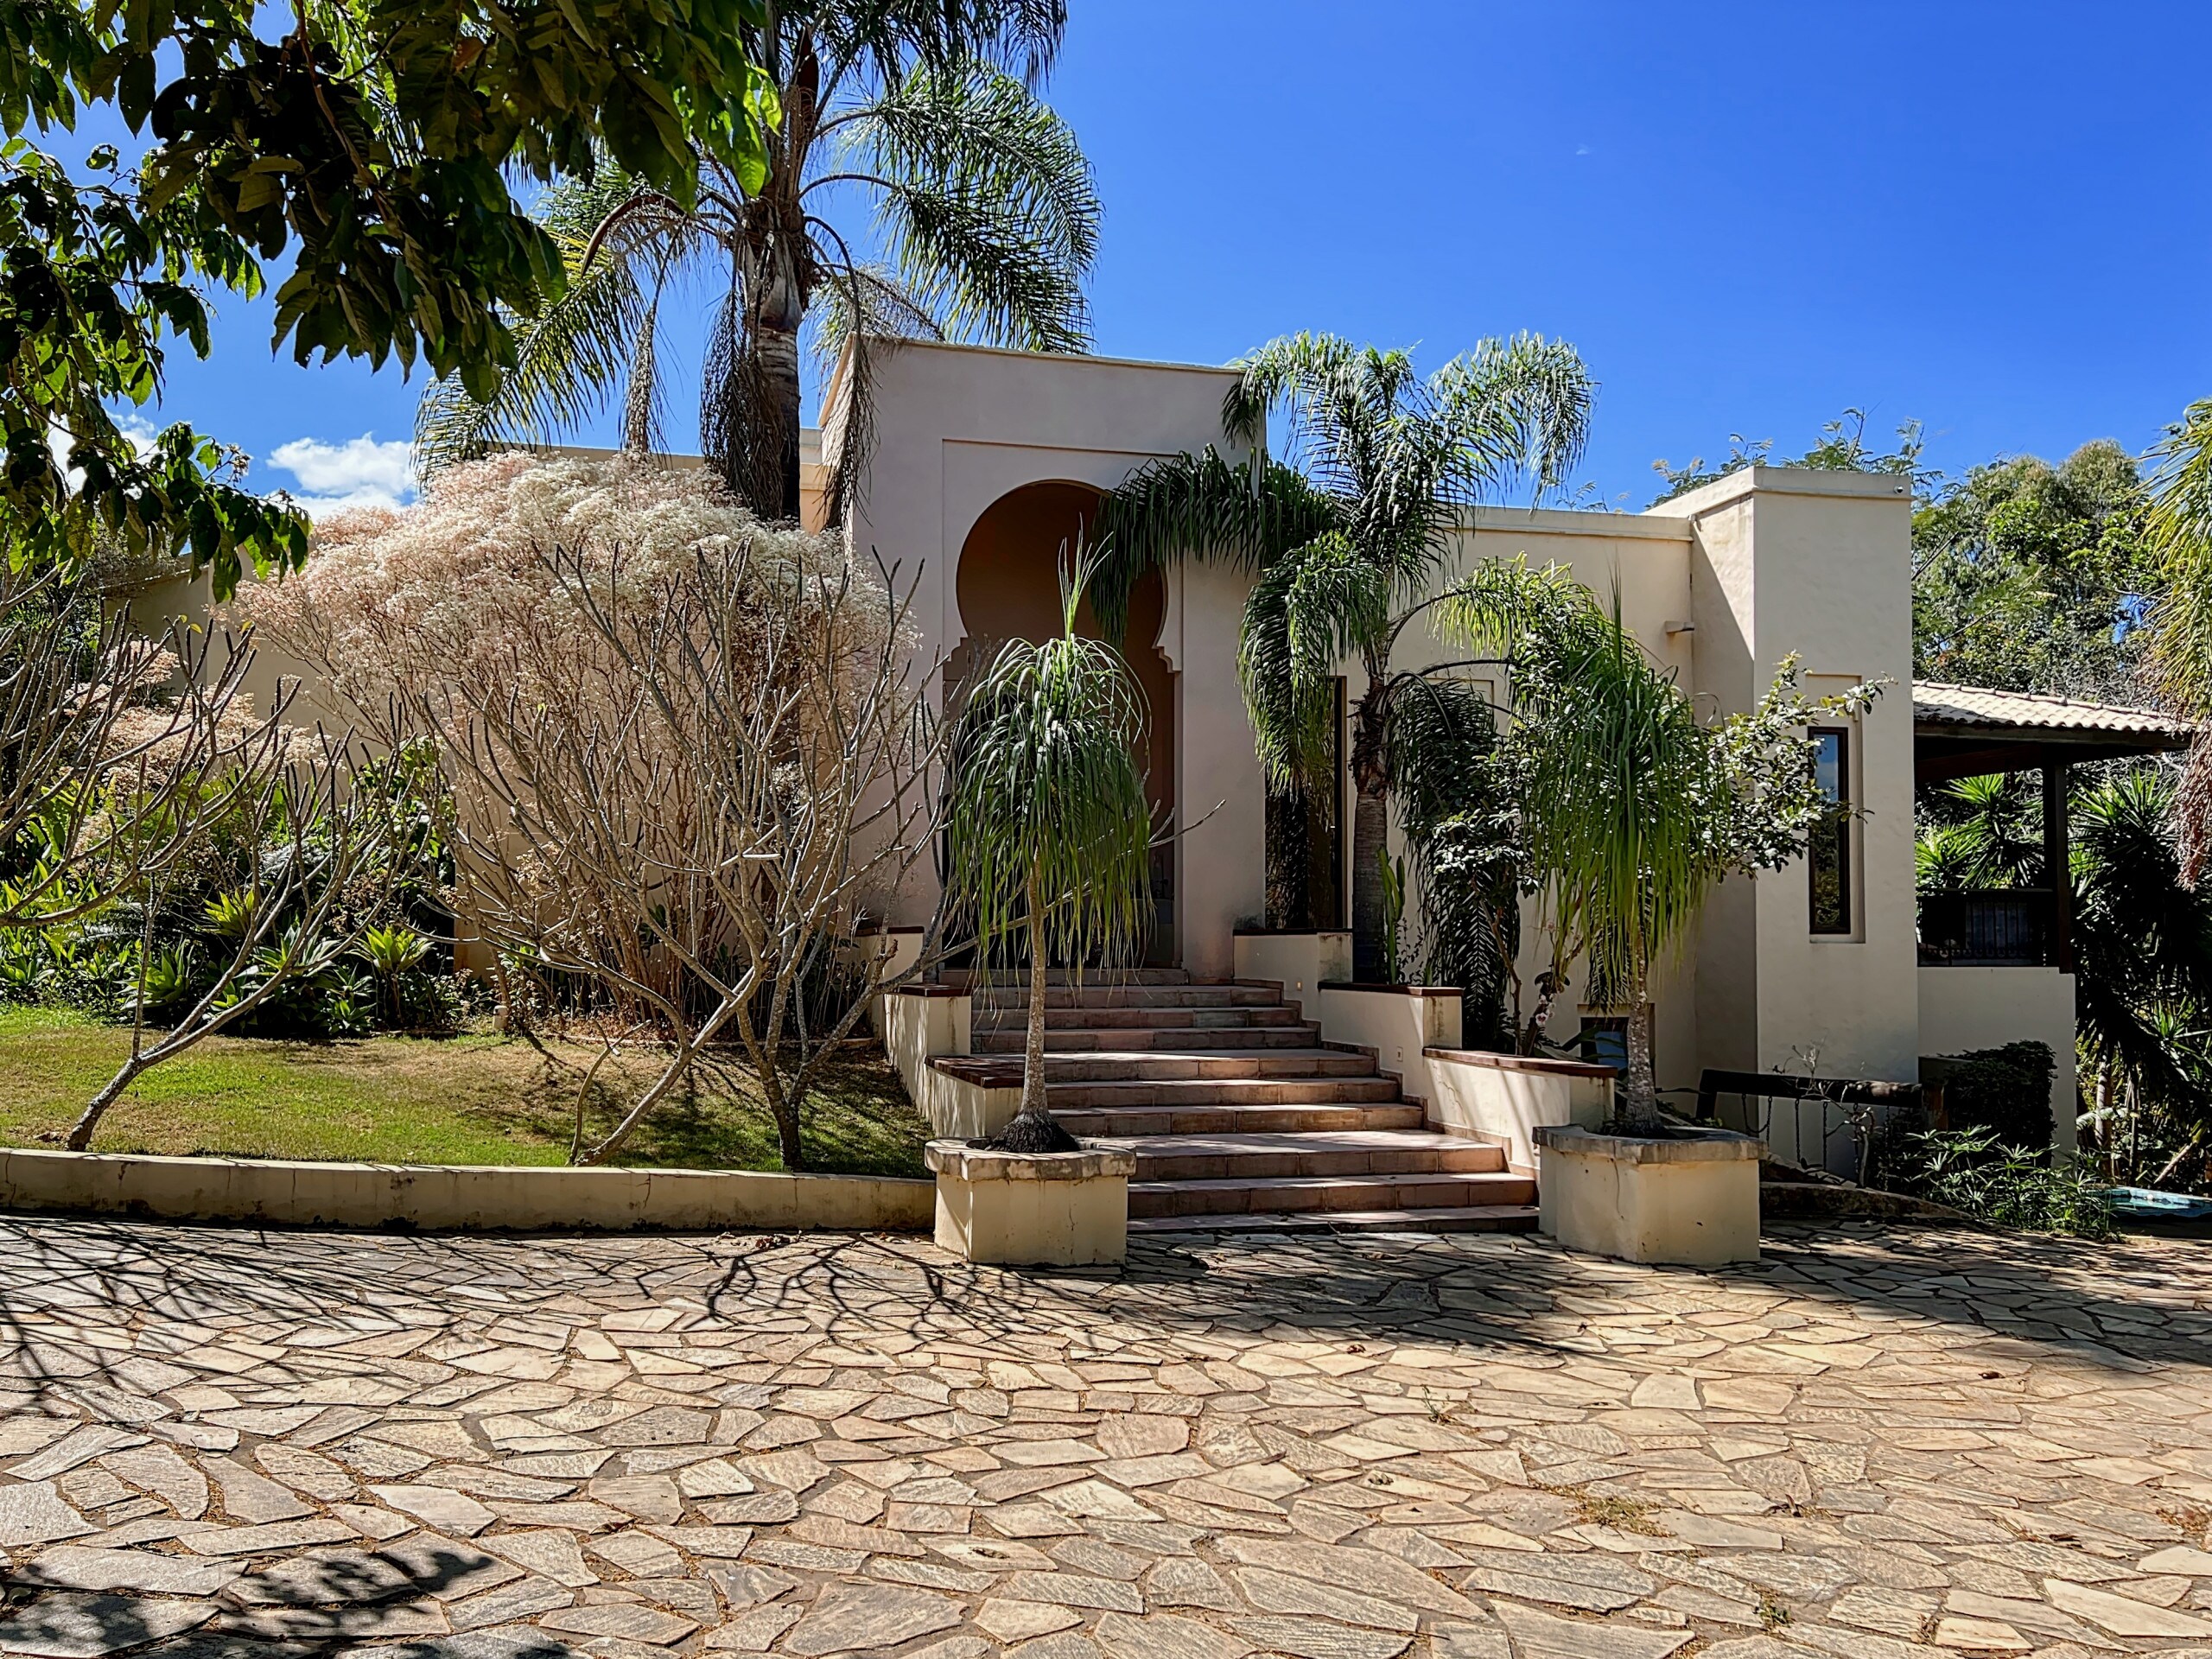 Property Image 1 - 4 bedroom villa with pool in the heart of nature in Alto Paraíso